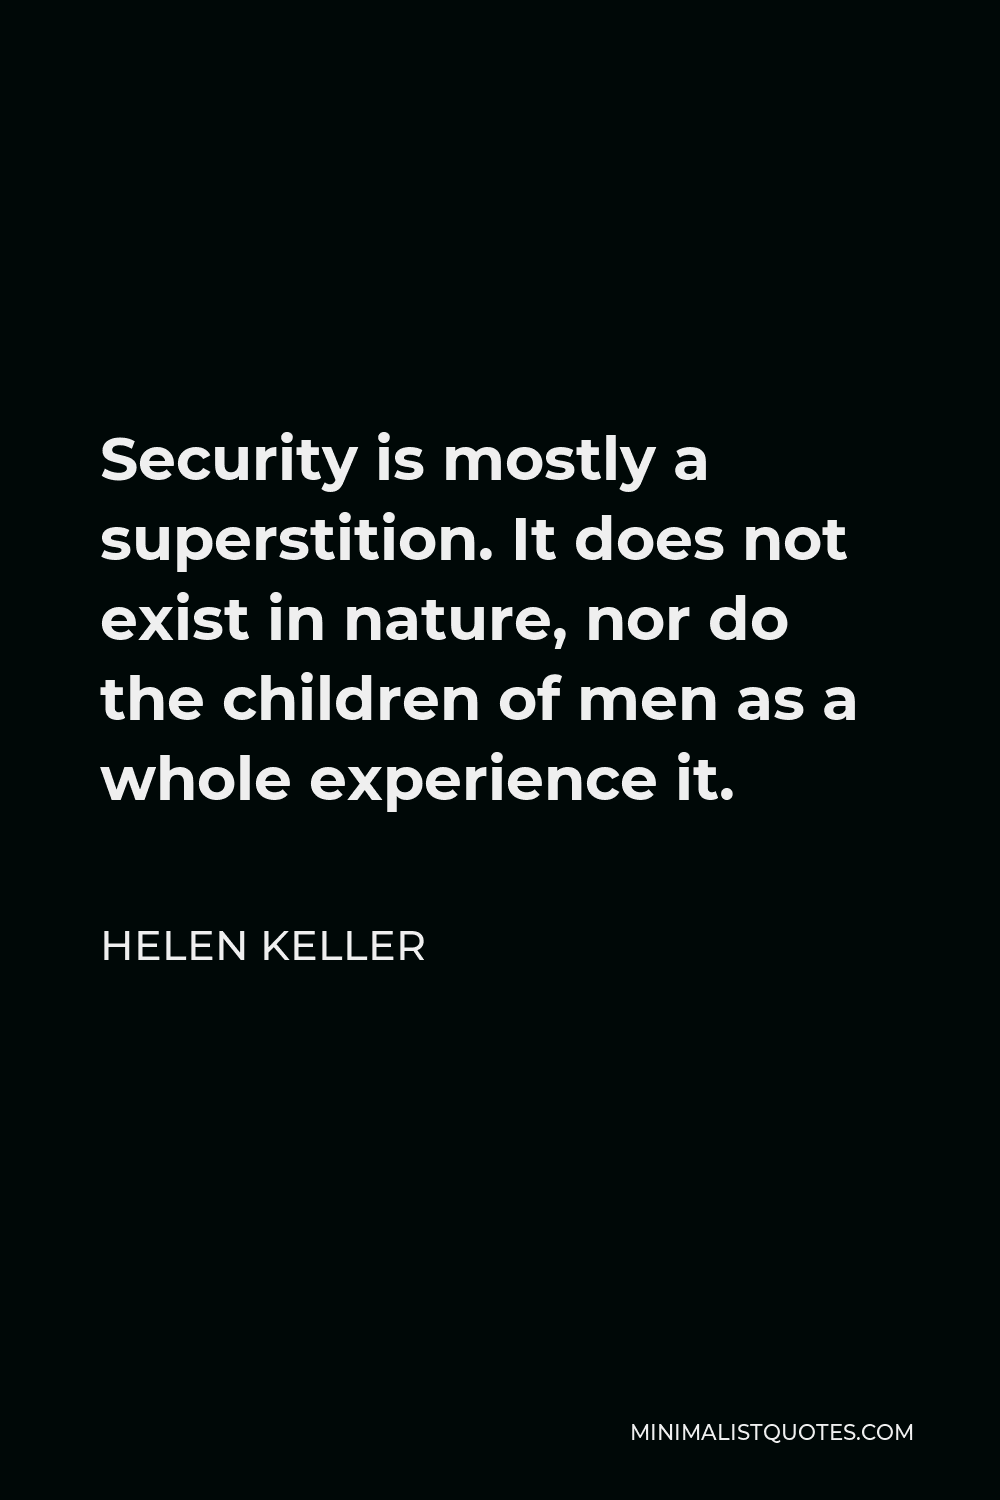 Helen Keller Quote Security Is Mostly A Superstition It Does Not Exist In Nature Nor Do The Children Of Men As A Whole Experience It